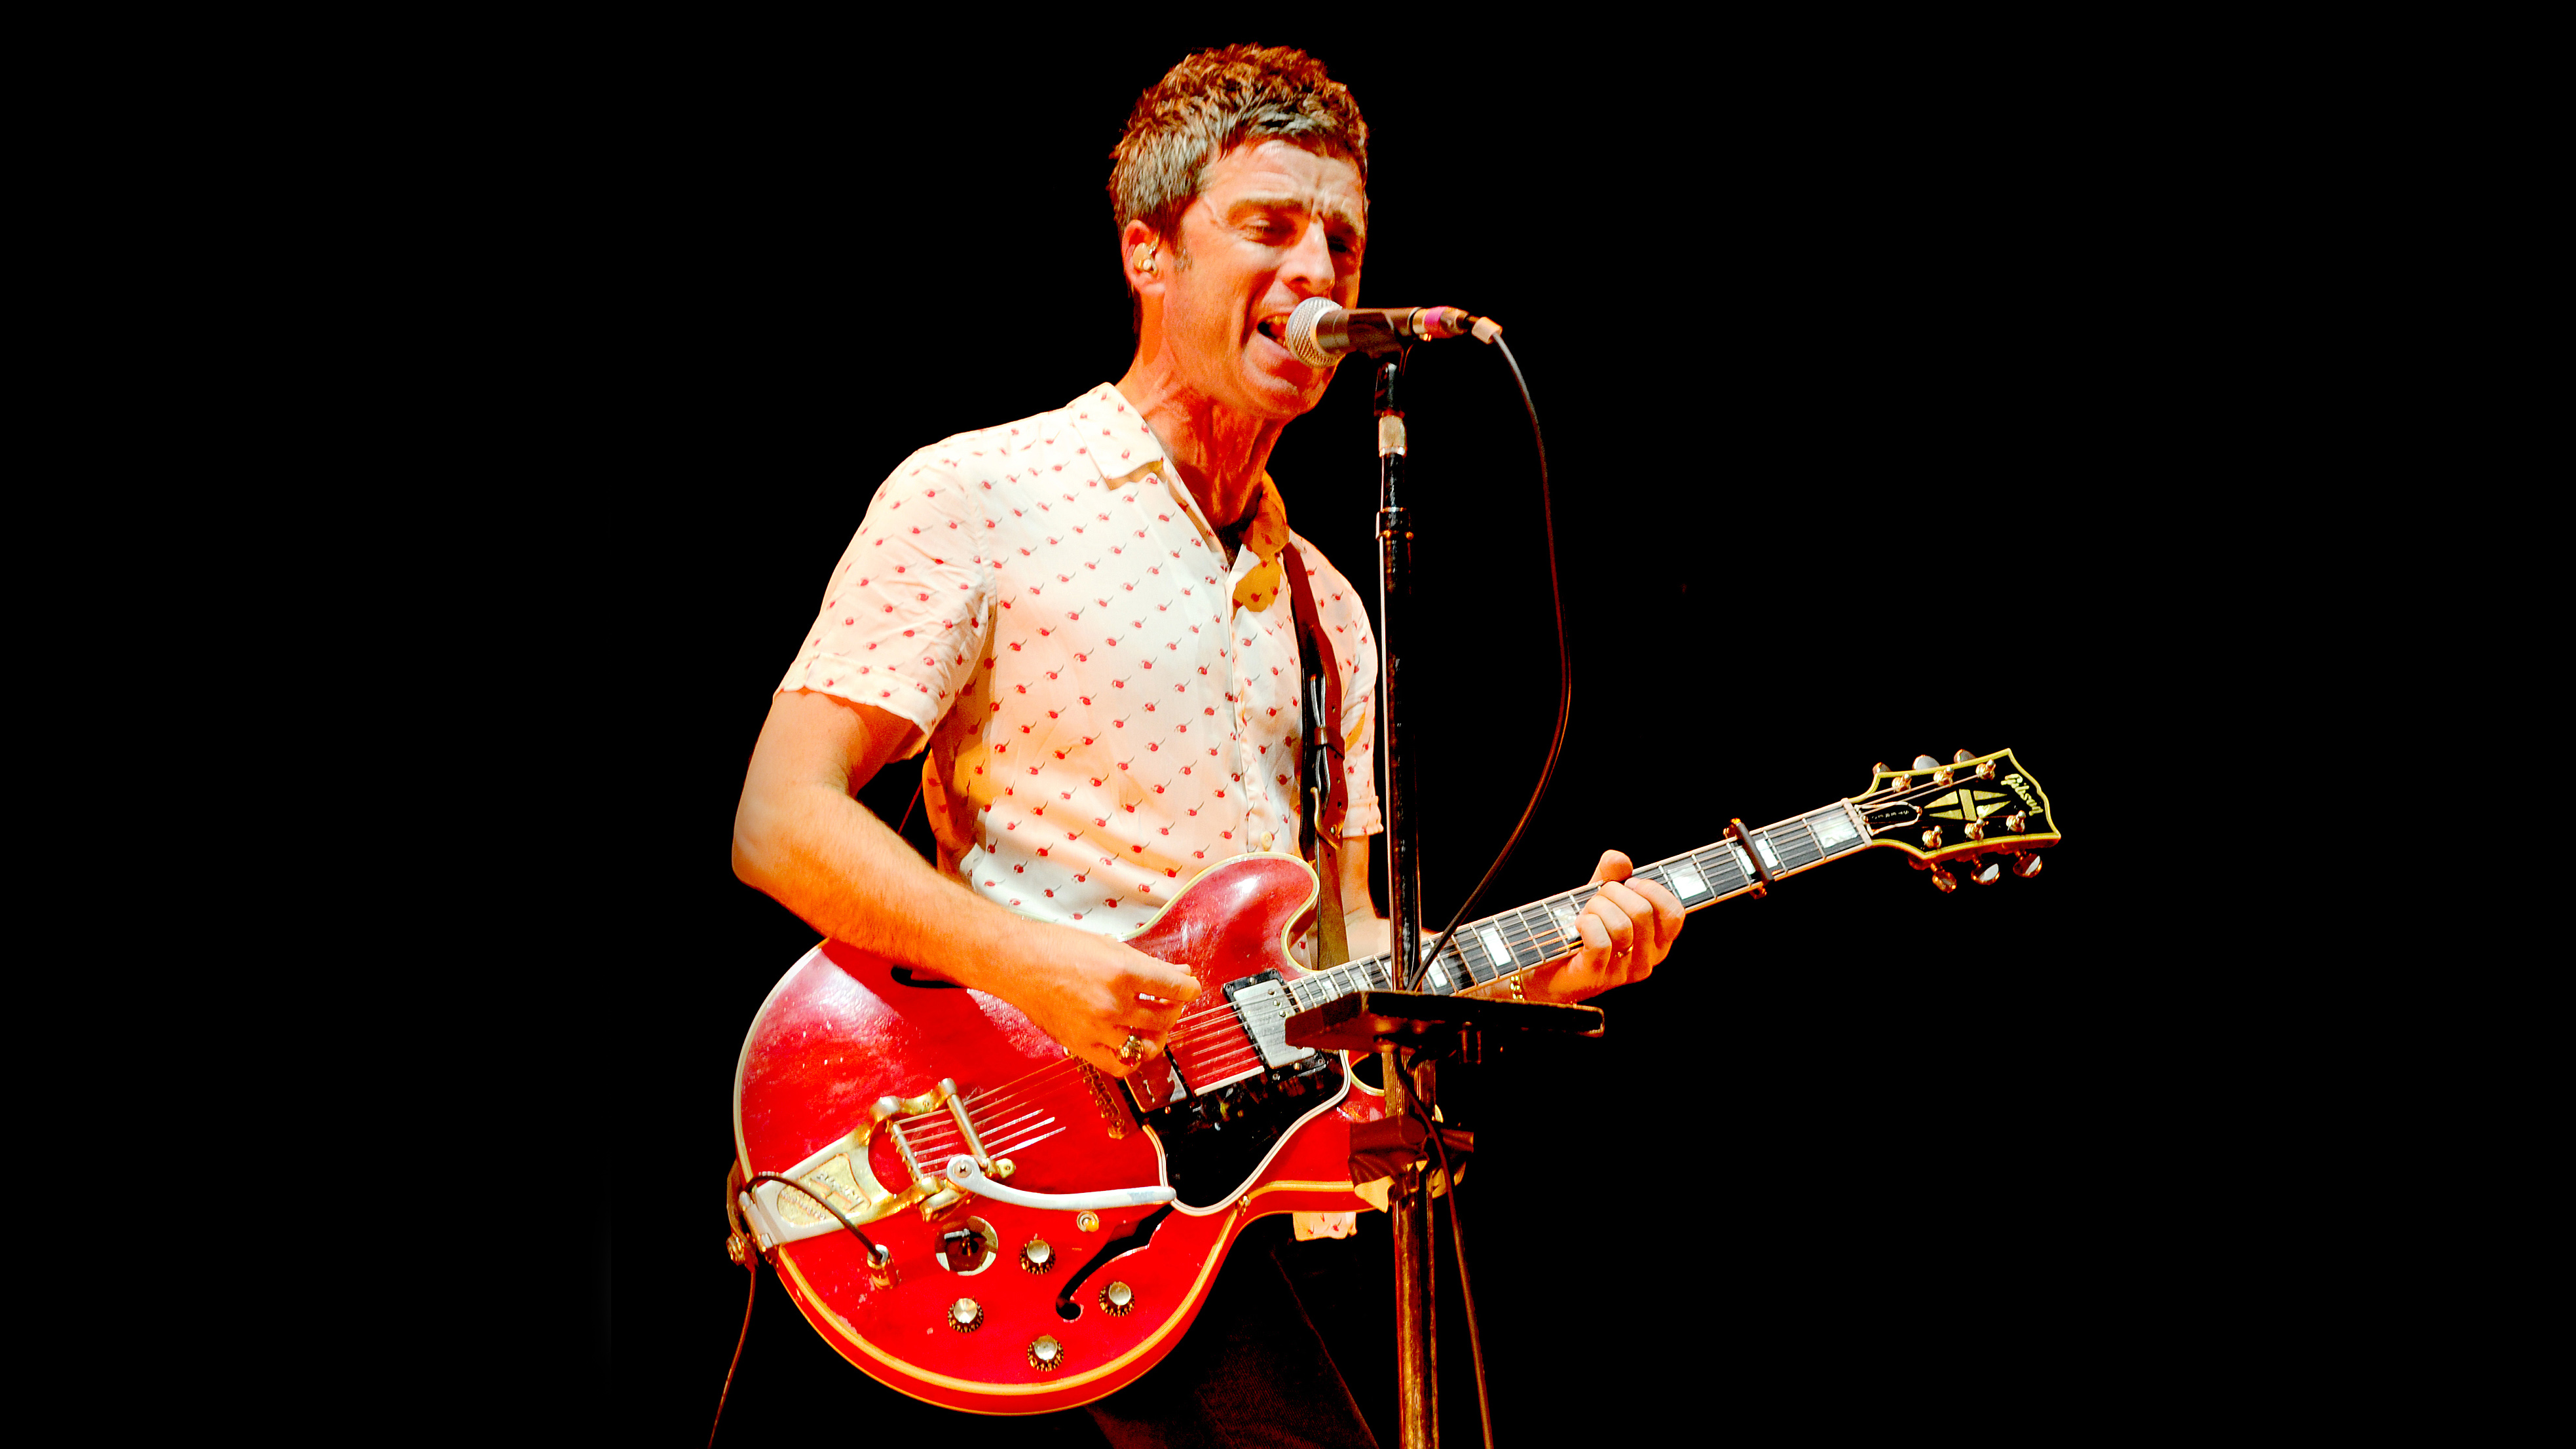 The Gibson ES-355 broke up Oasis sells for £325,000 – but it's not the Noel Gallagher guitar his forthcoming 355 signature is based on | MusicRadar